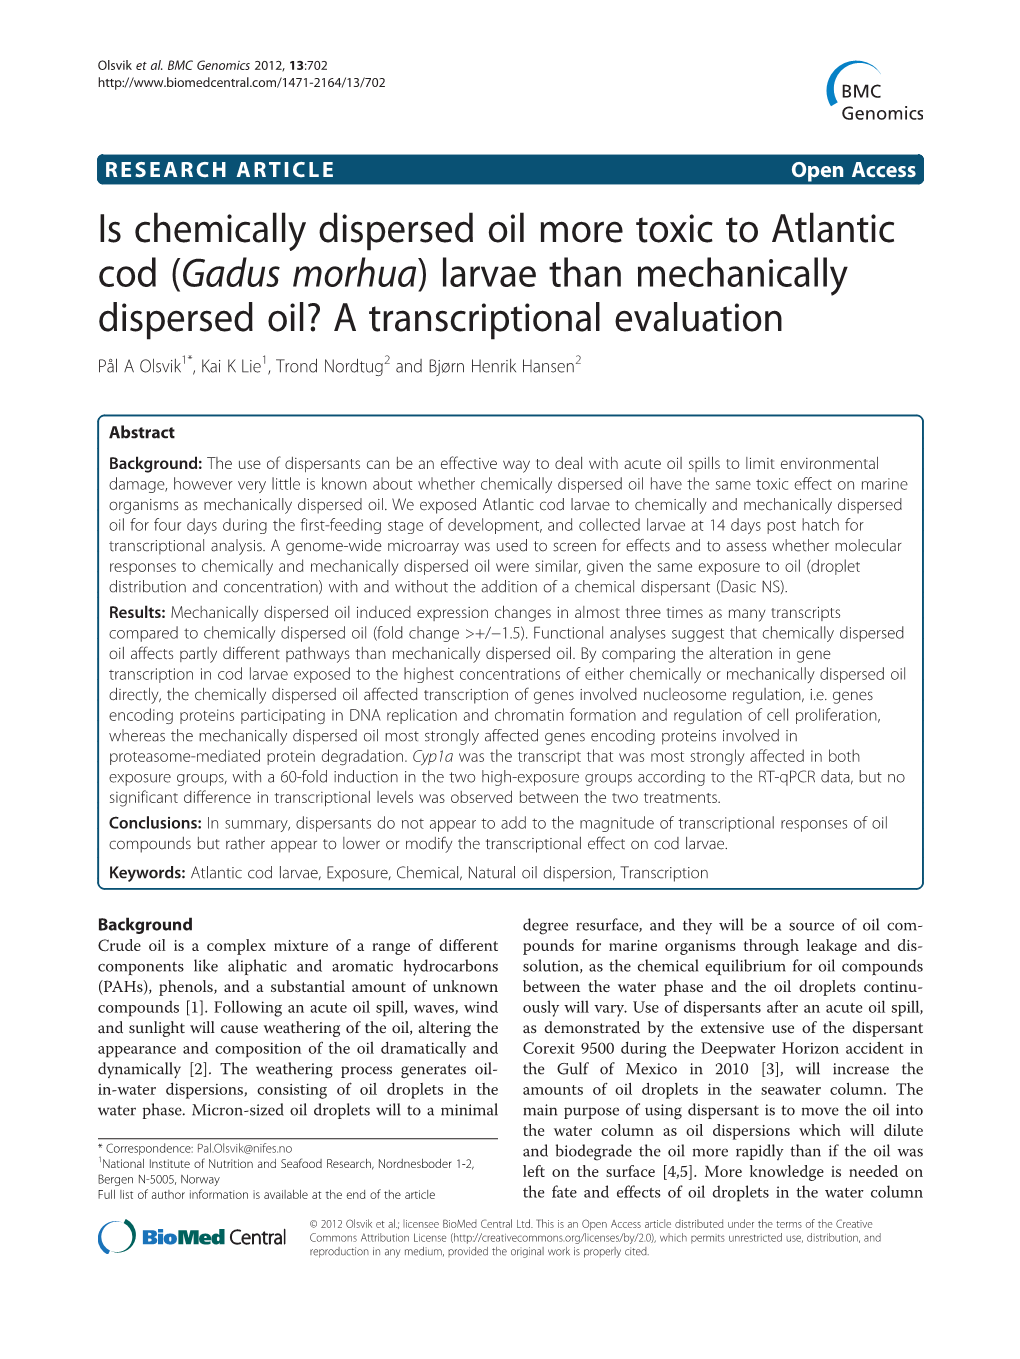 Is Chemically Dispersed Oil More Toxic to Atlantic Cod